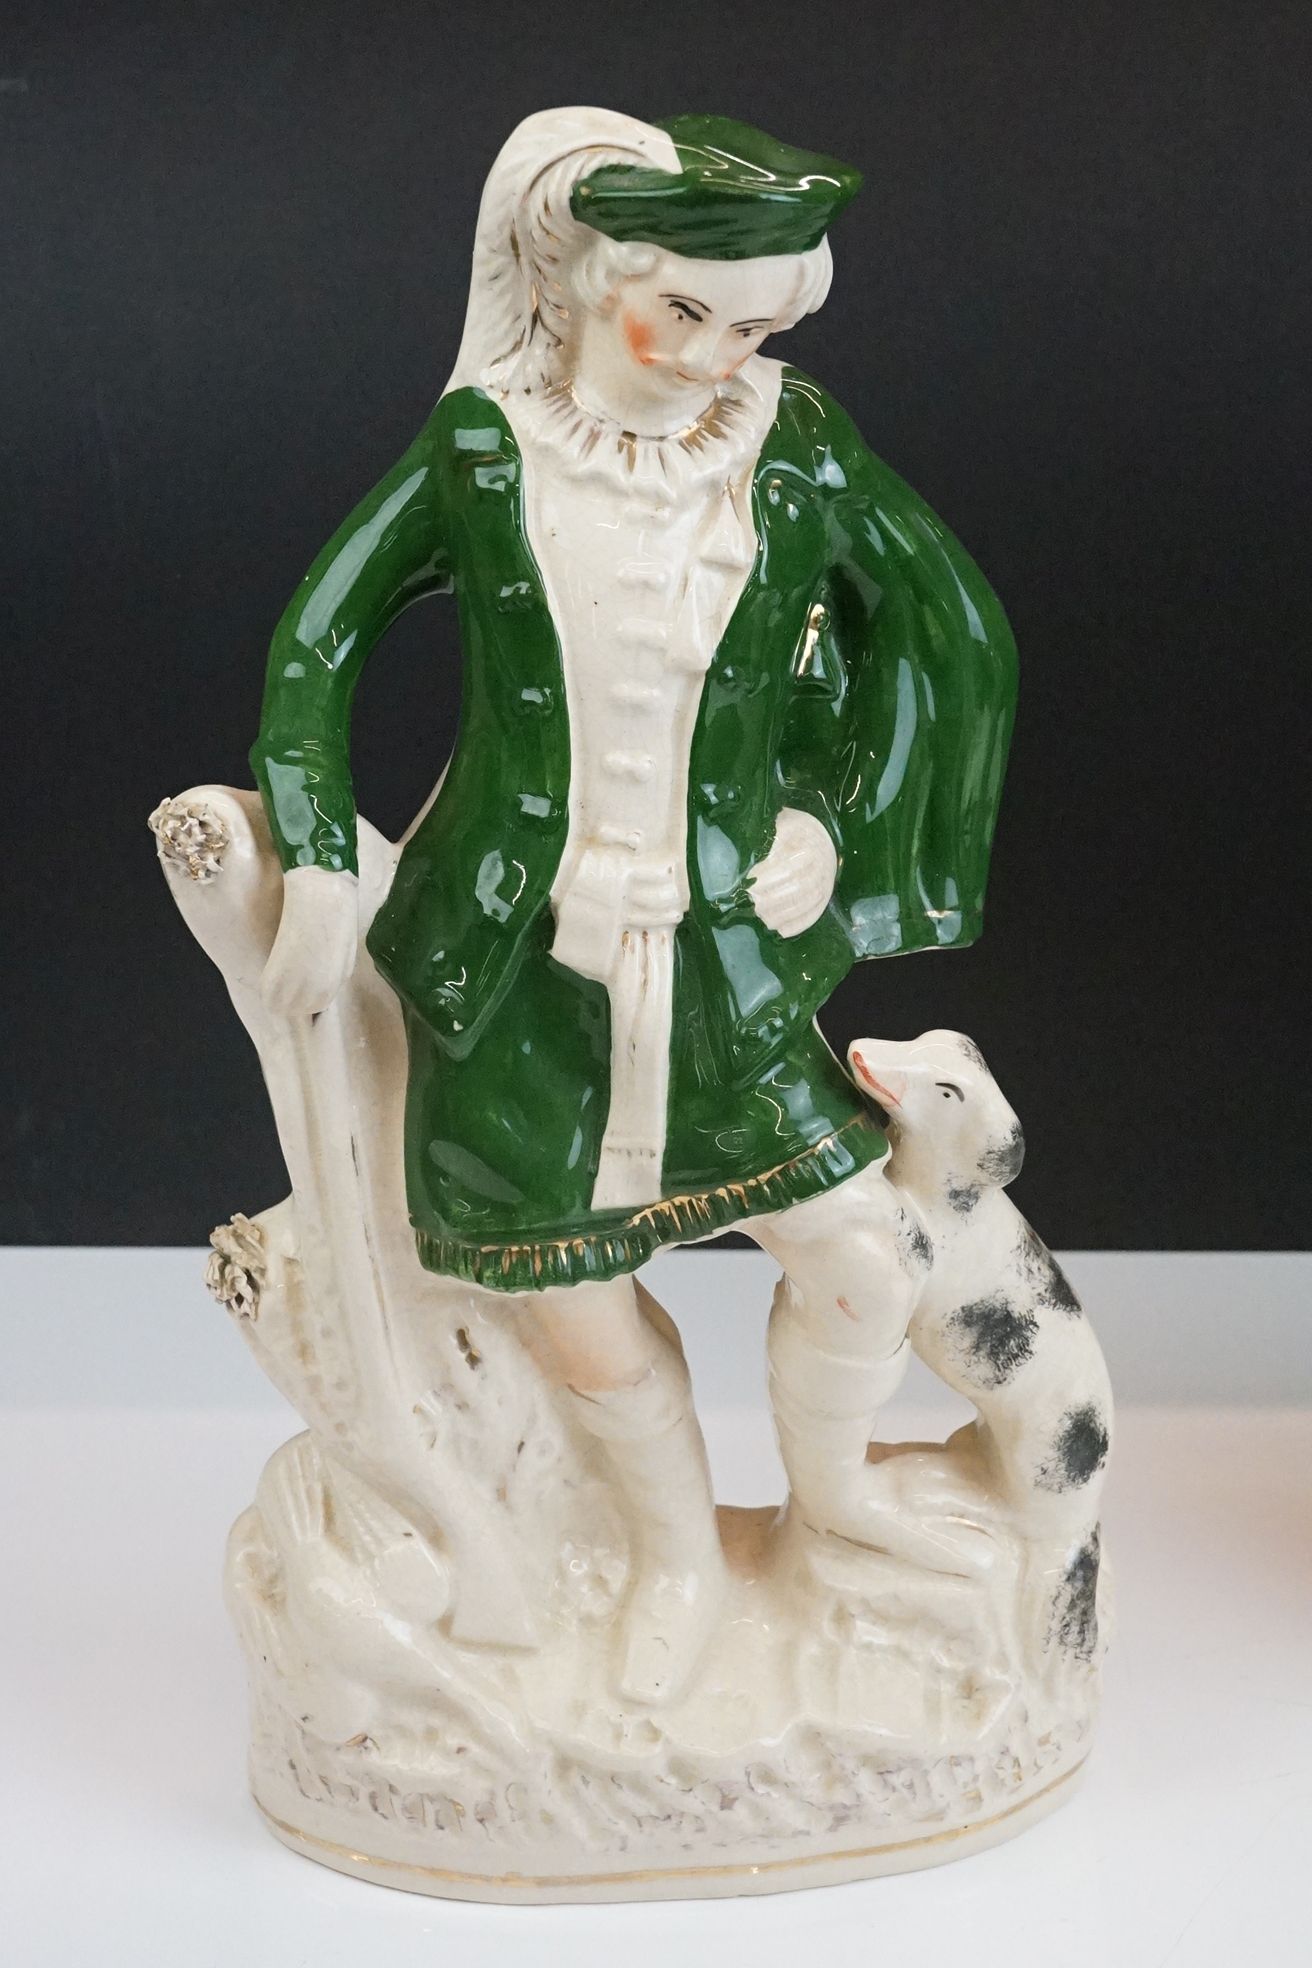 Two Staffordshire Figures of Bonnie Prince Charlie both wearing green jackets, 38cm high together - Image 4 of 13